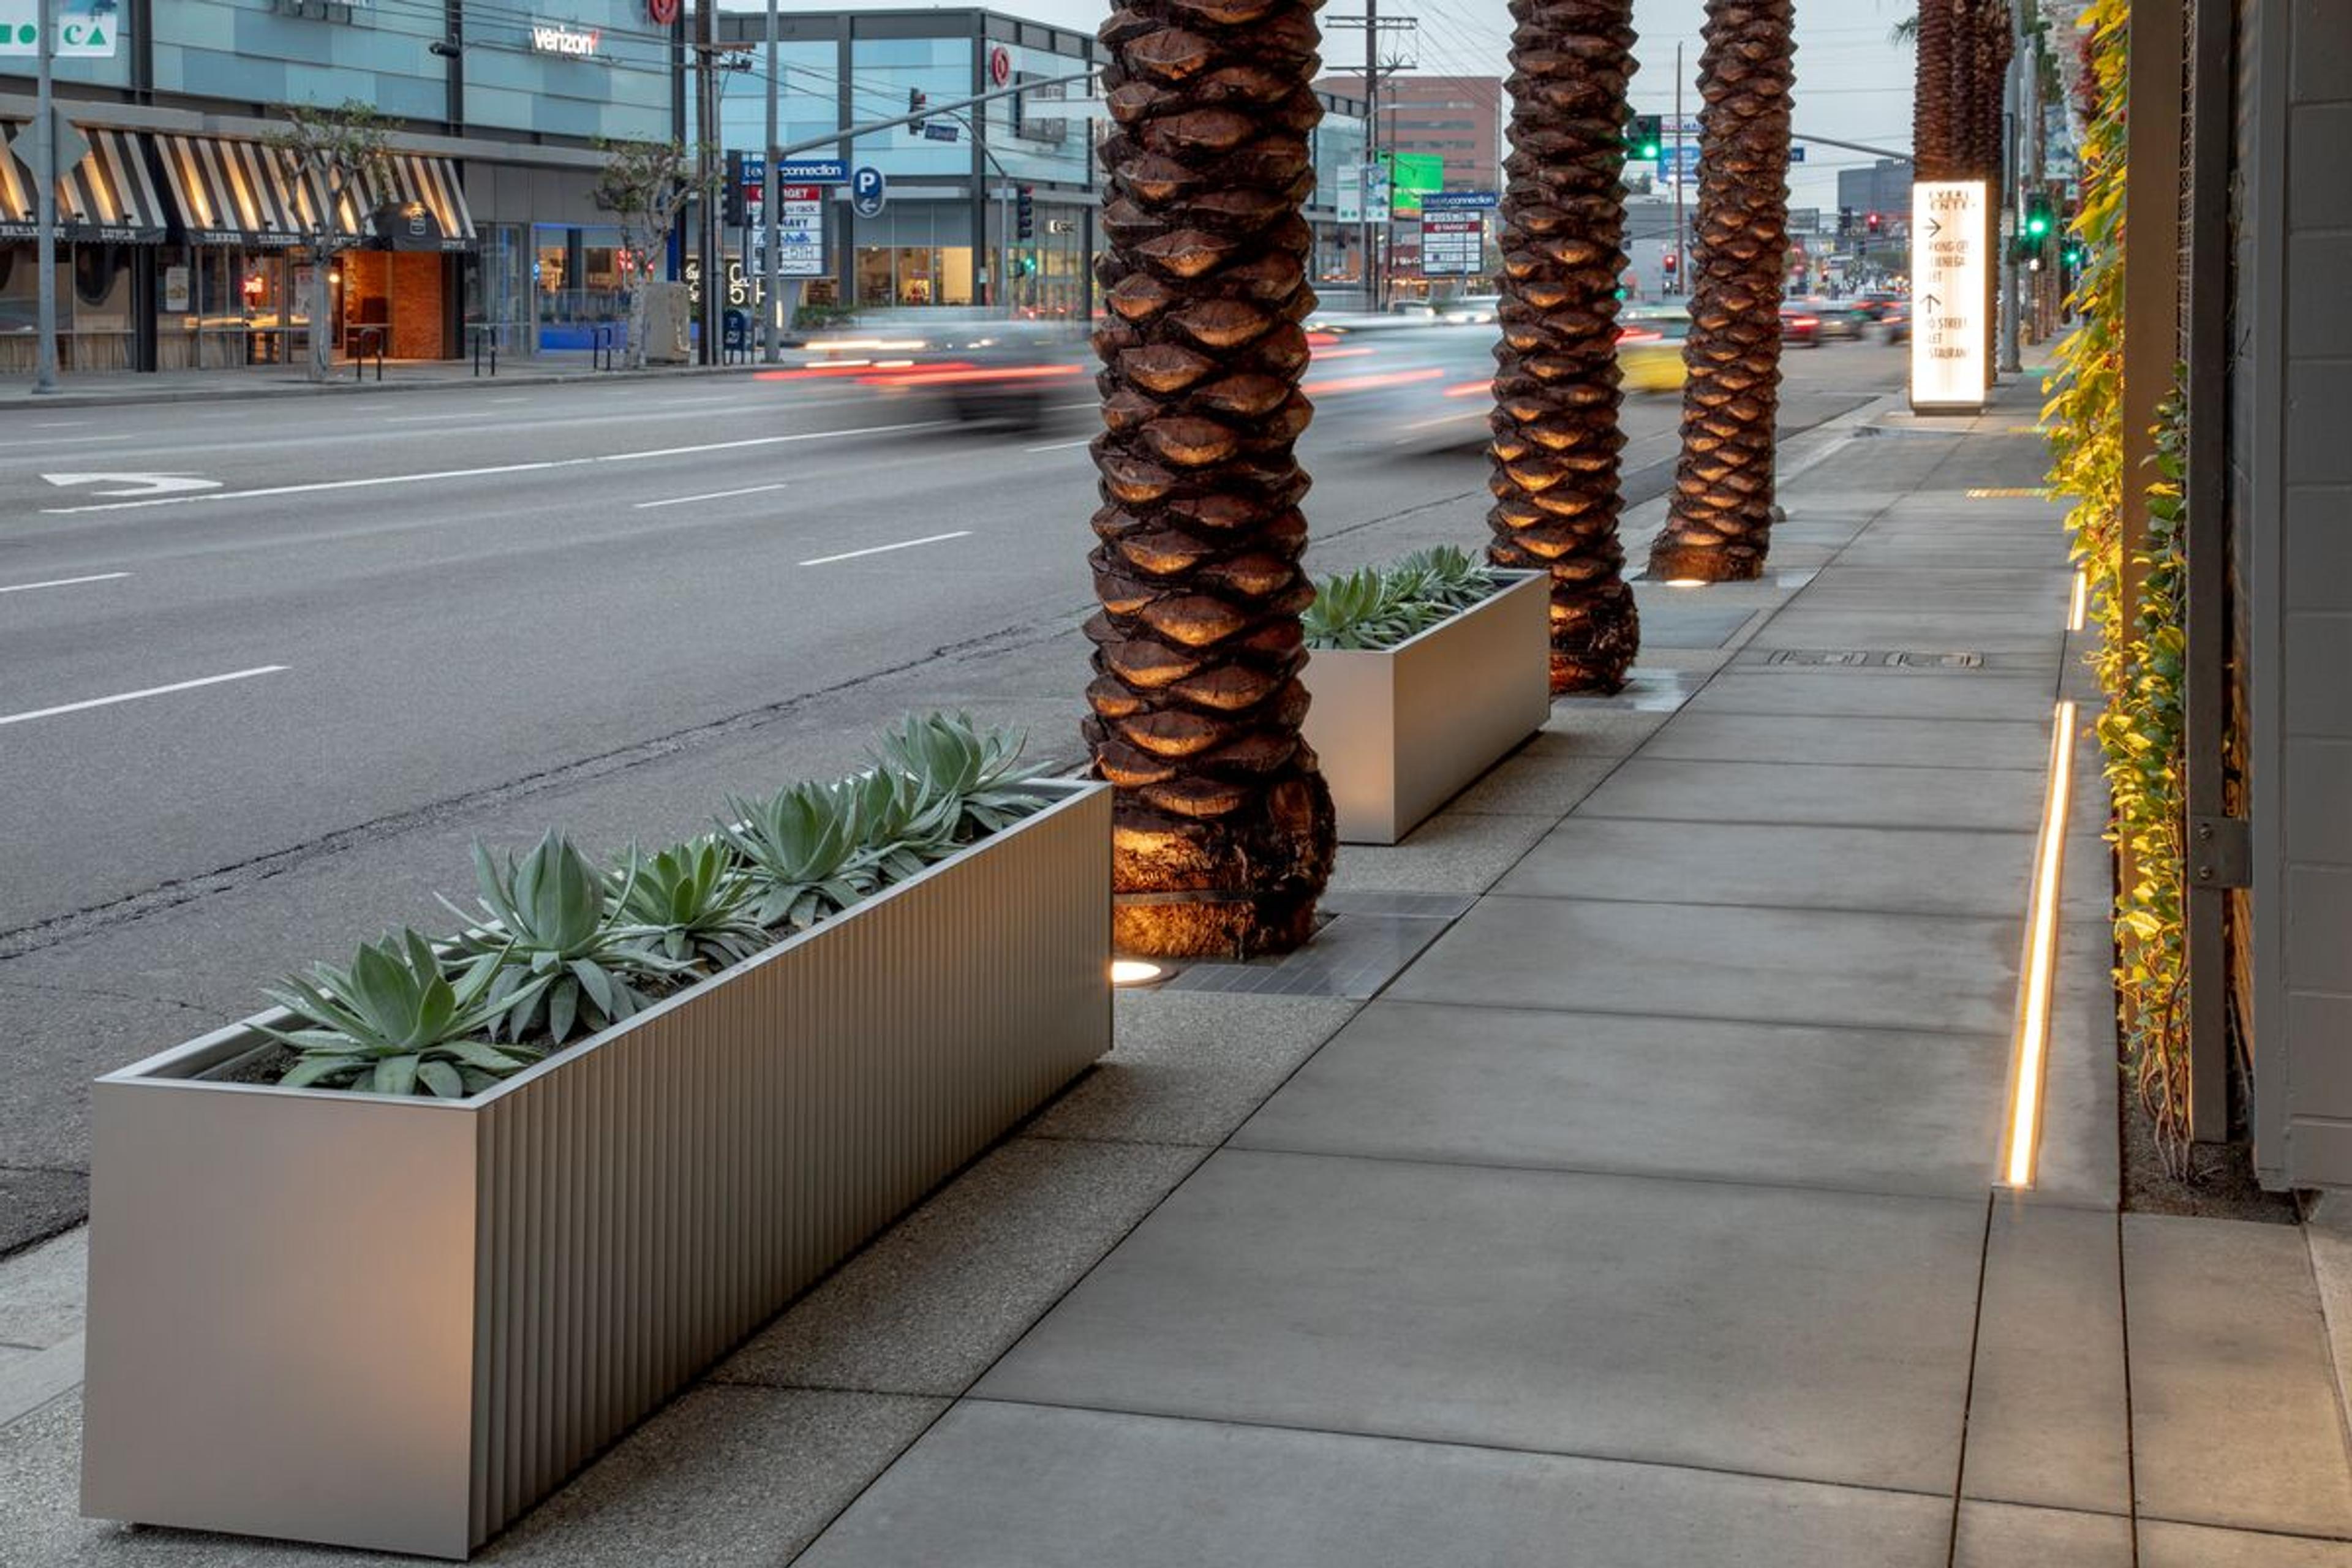 Custom planters • Constructed of durable stainless steel • Beverly Hills, California